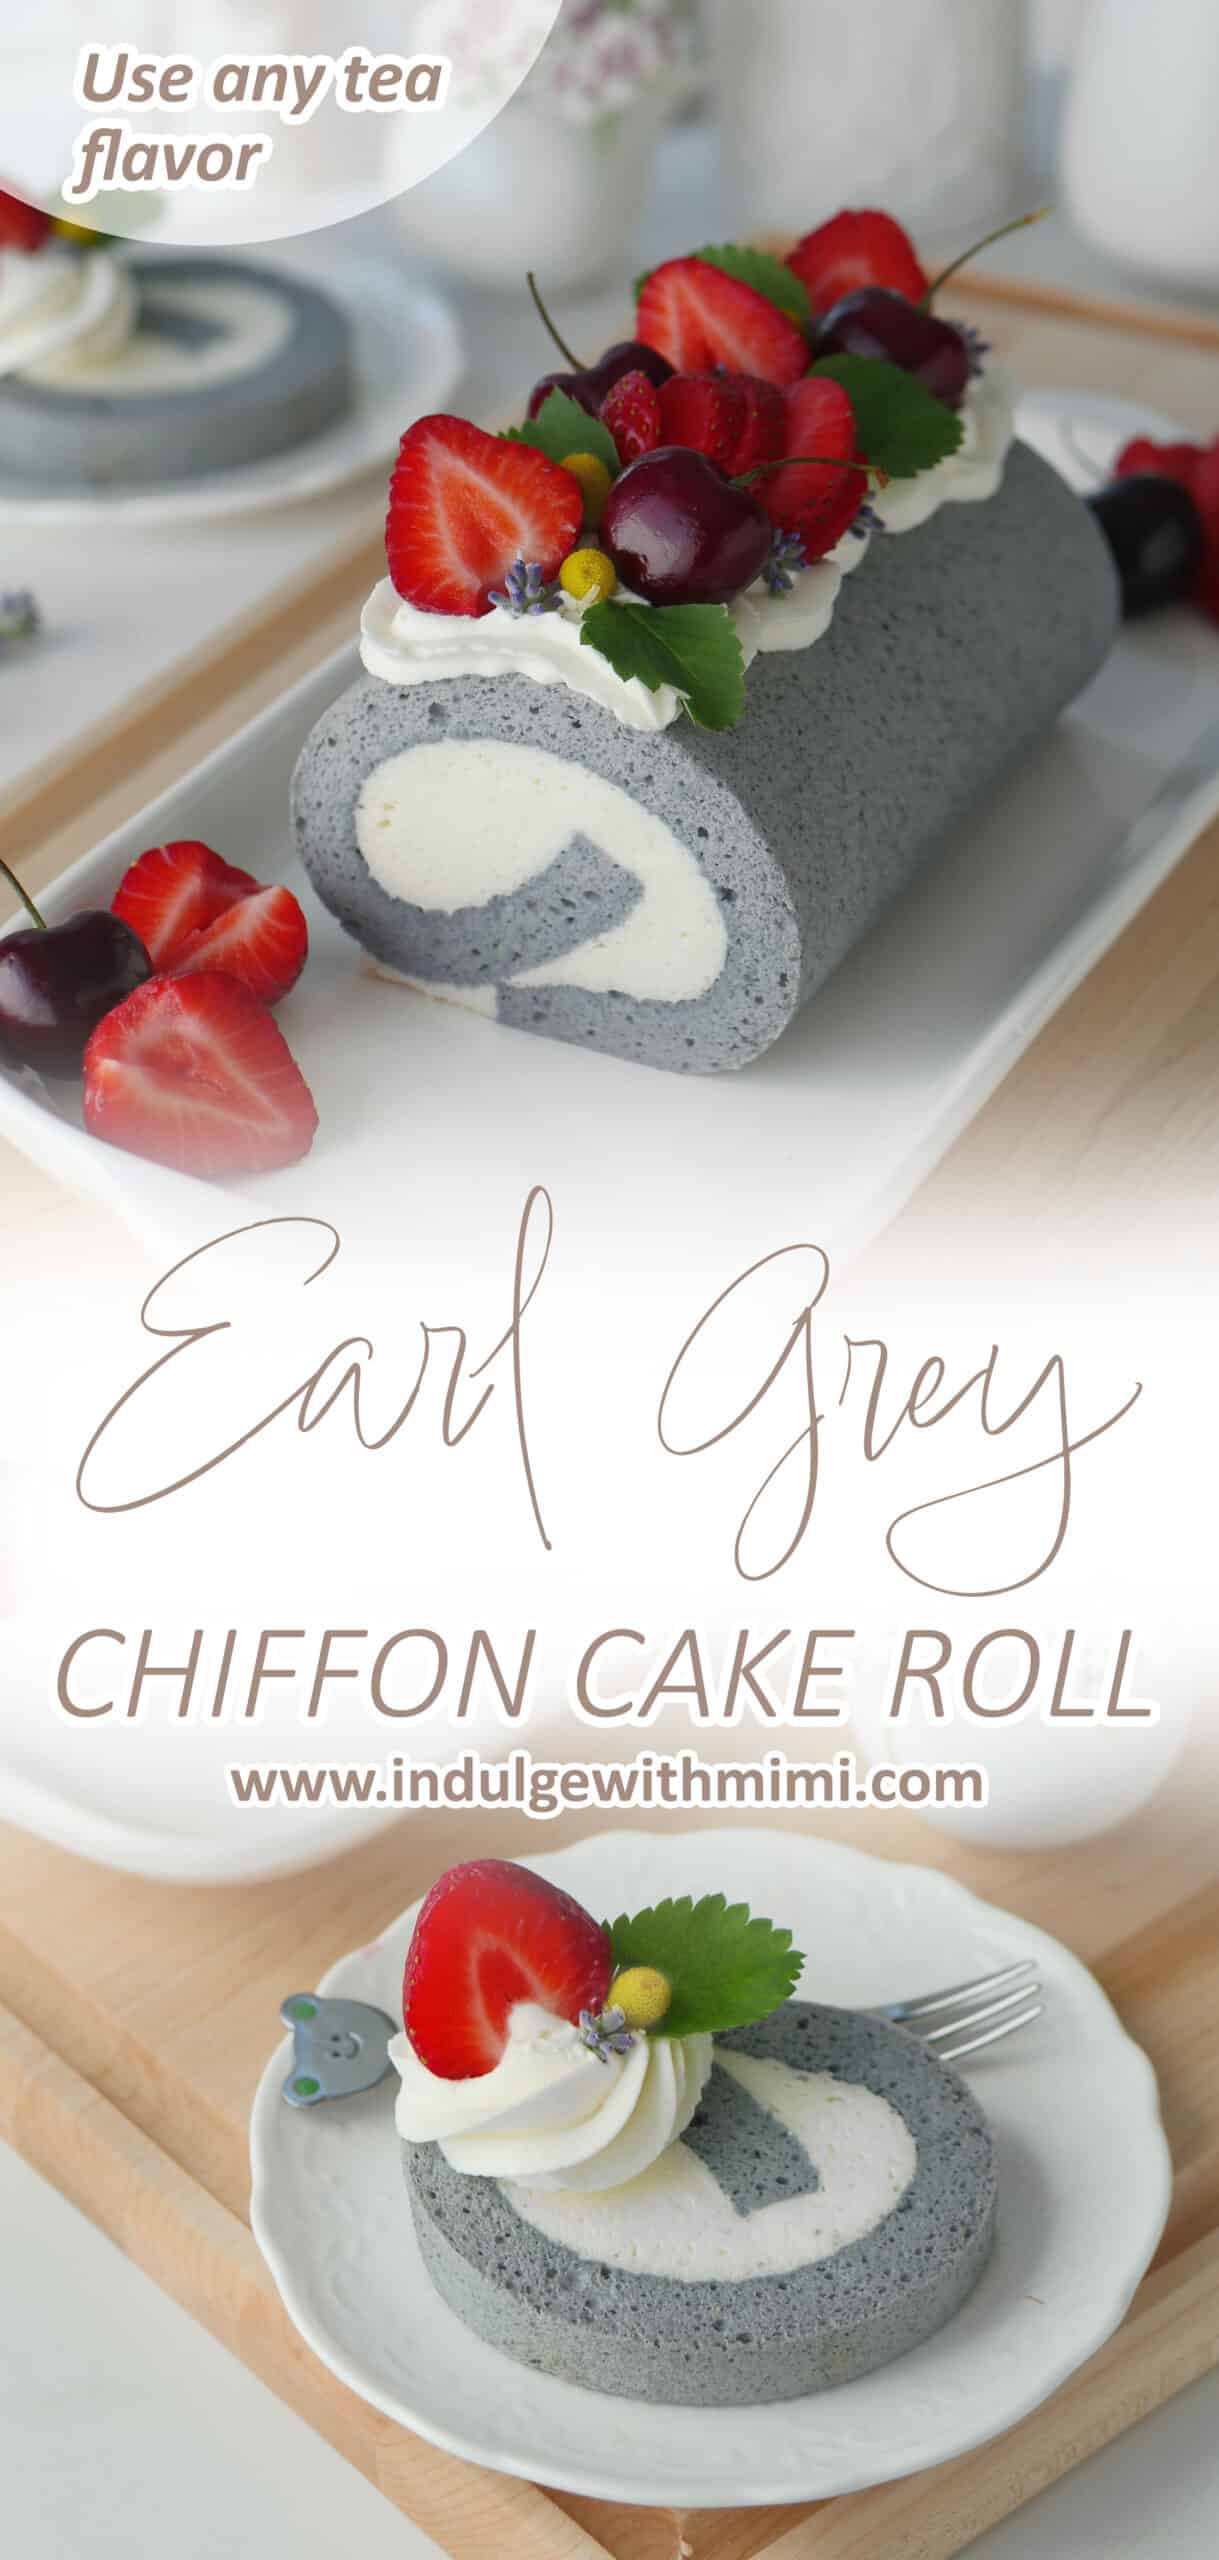 A grey colored Earl Grey tea cake roll is on a plate adorned with strawberries. Below is a close up of a slice of the cake.